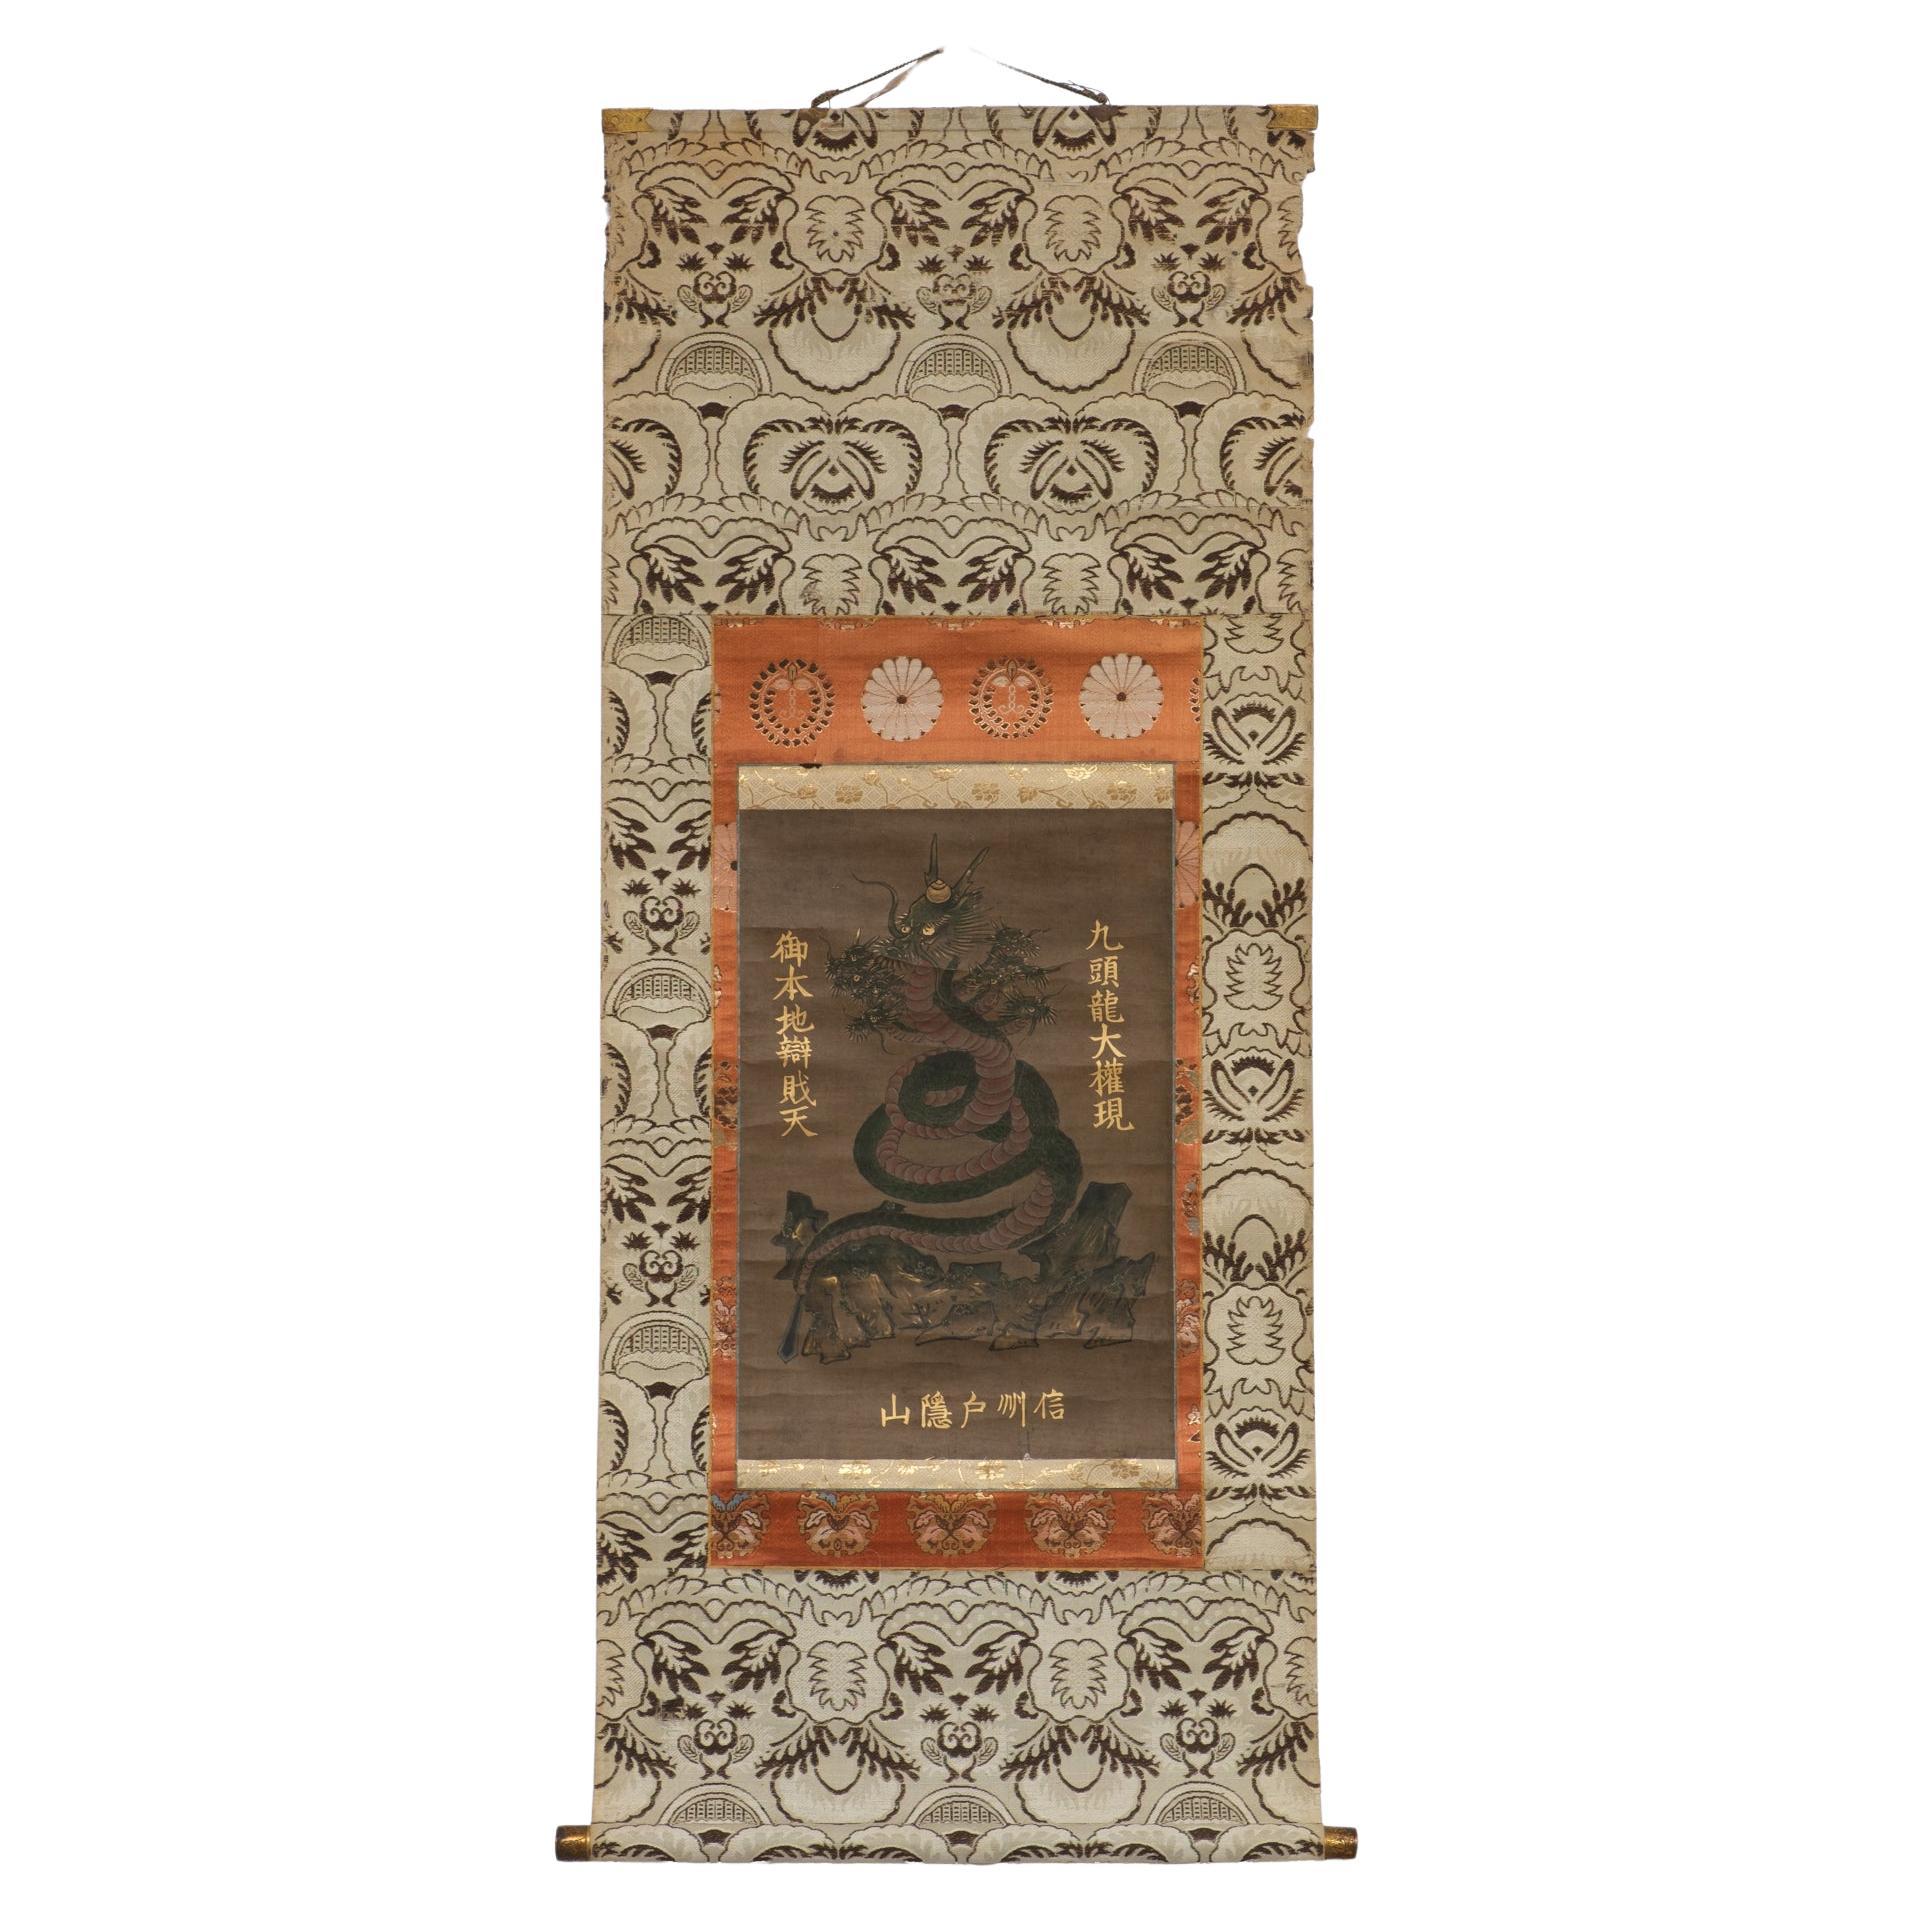 260 Year Old Japanese Hanging Scroll with Painting of the 9-Headed Dragon Deity